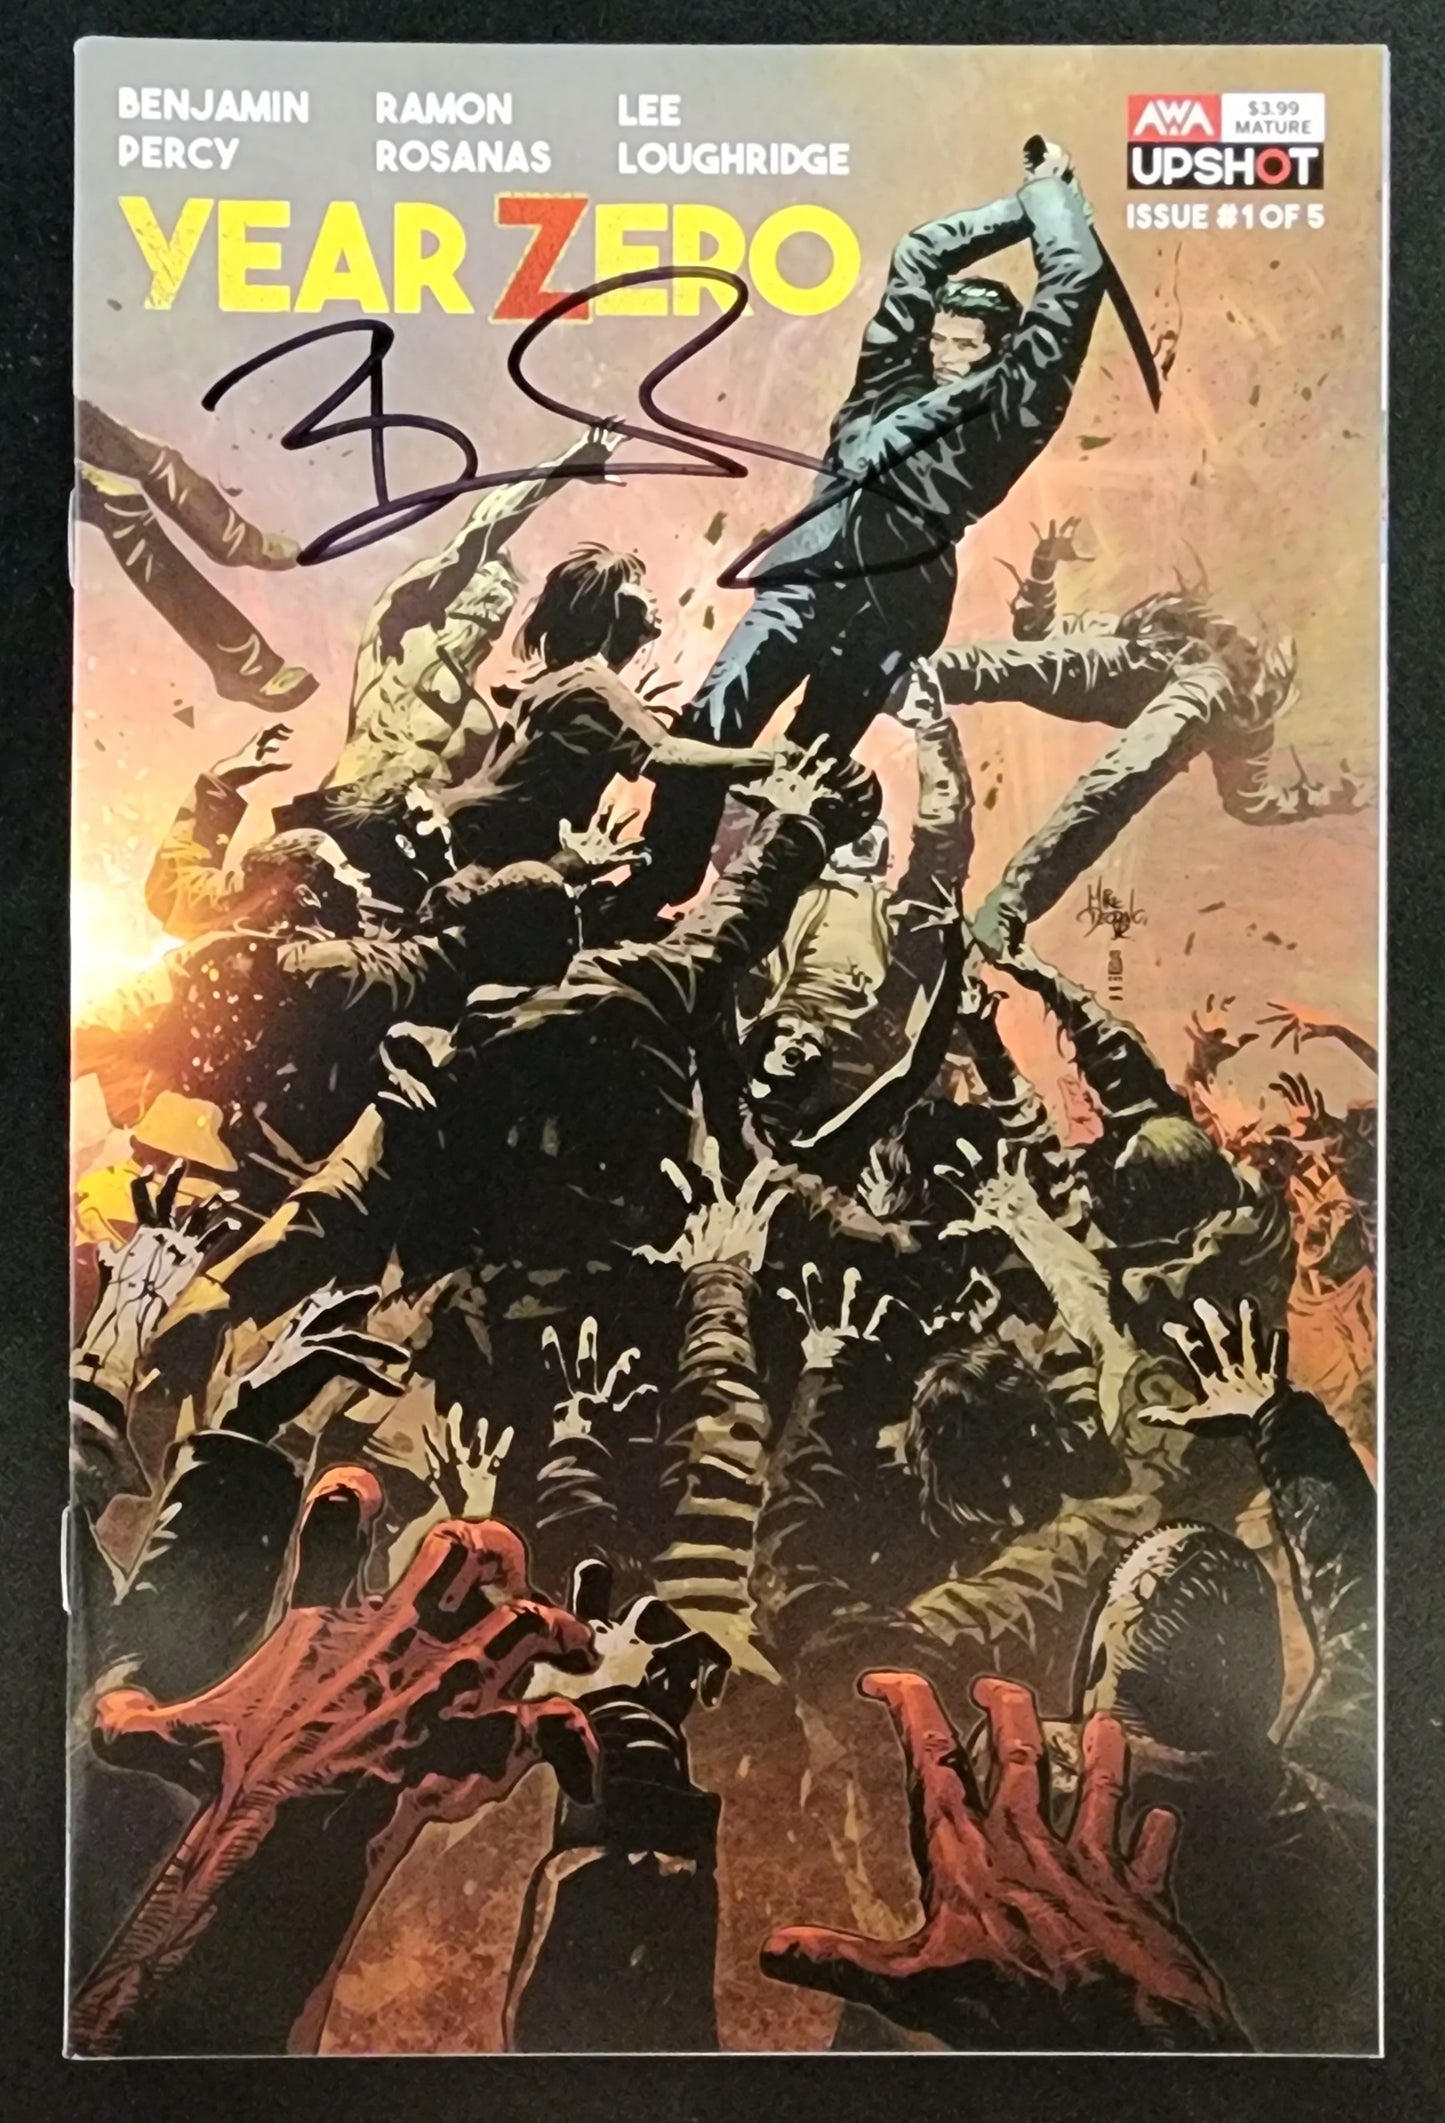 YEAR ZERO #1 VARIANT SIGNED BY BEN PERCY 2020